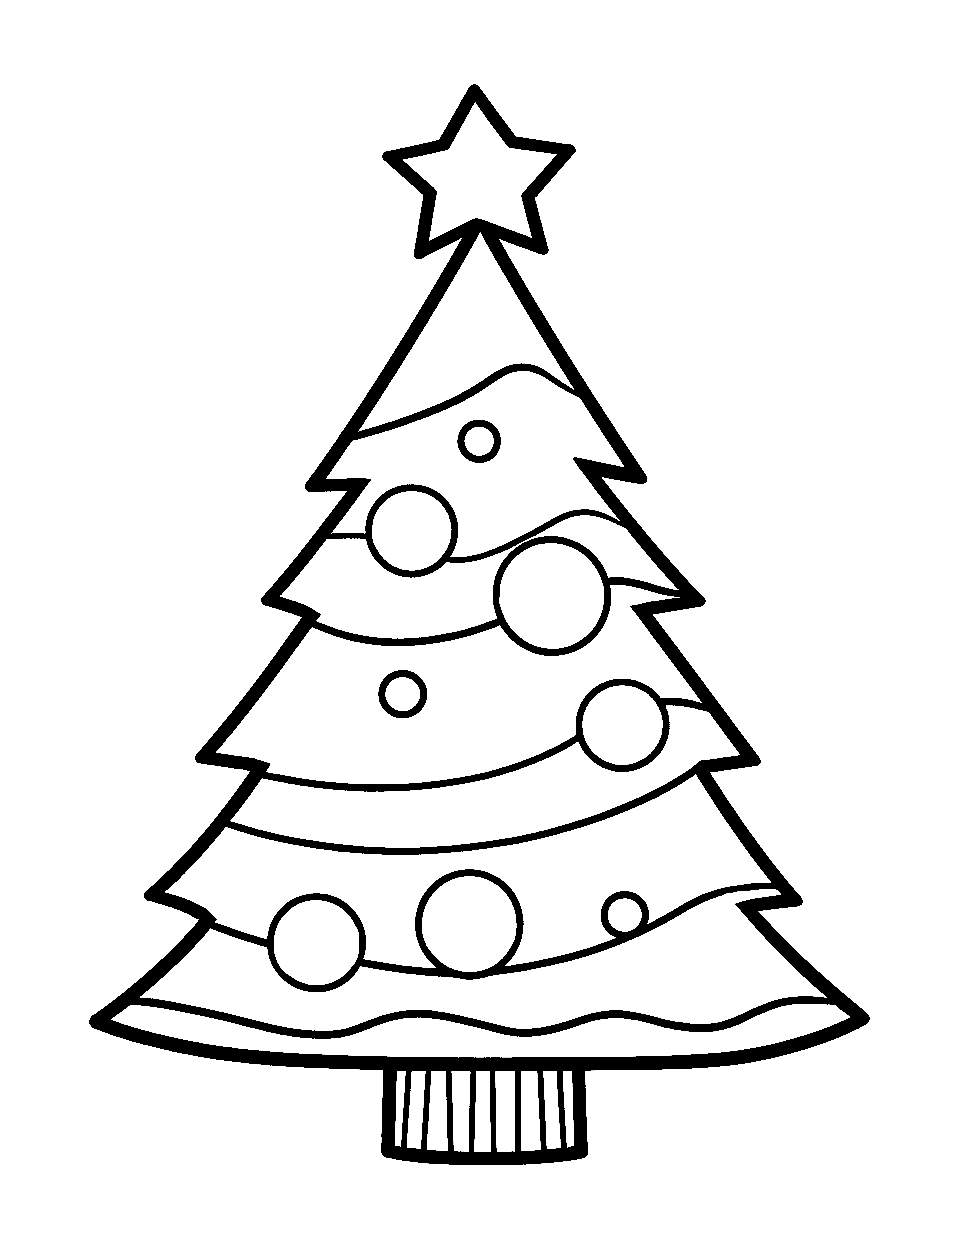 Christmas tree coloring pages free printables